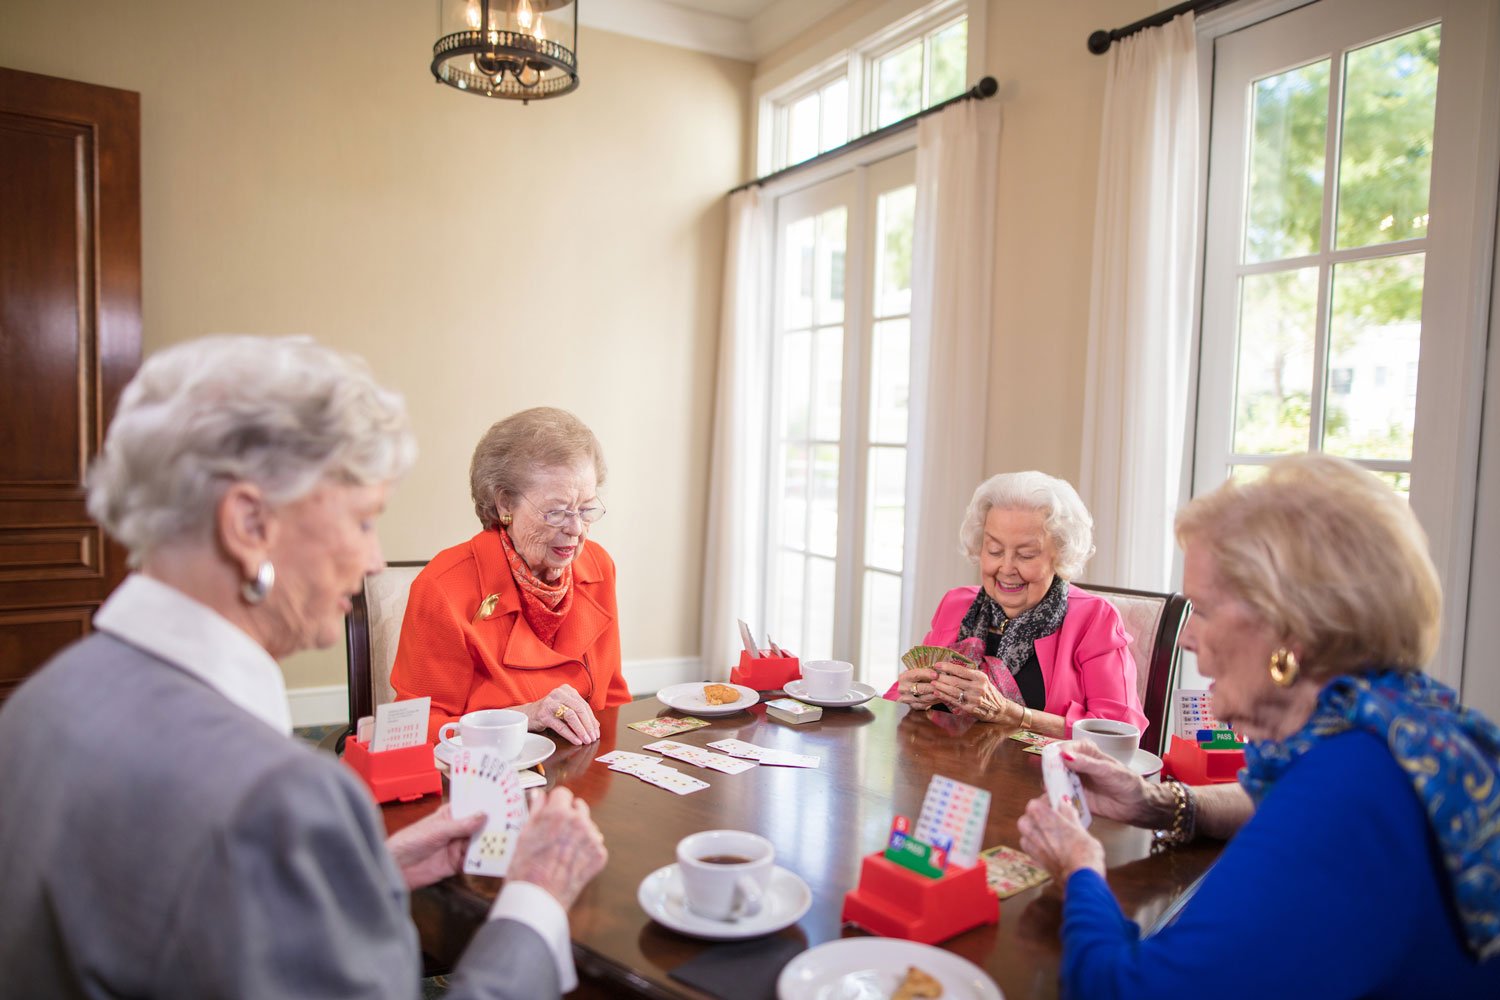 Seniors sitting around a card table playing a card game together